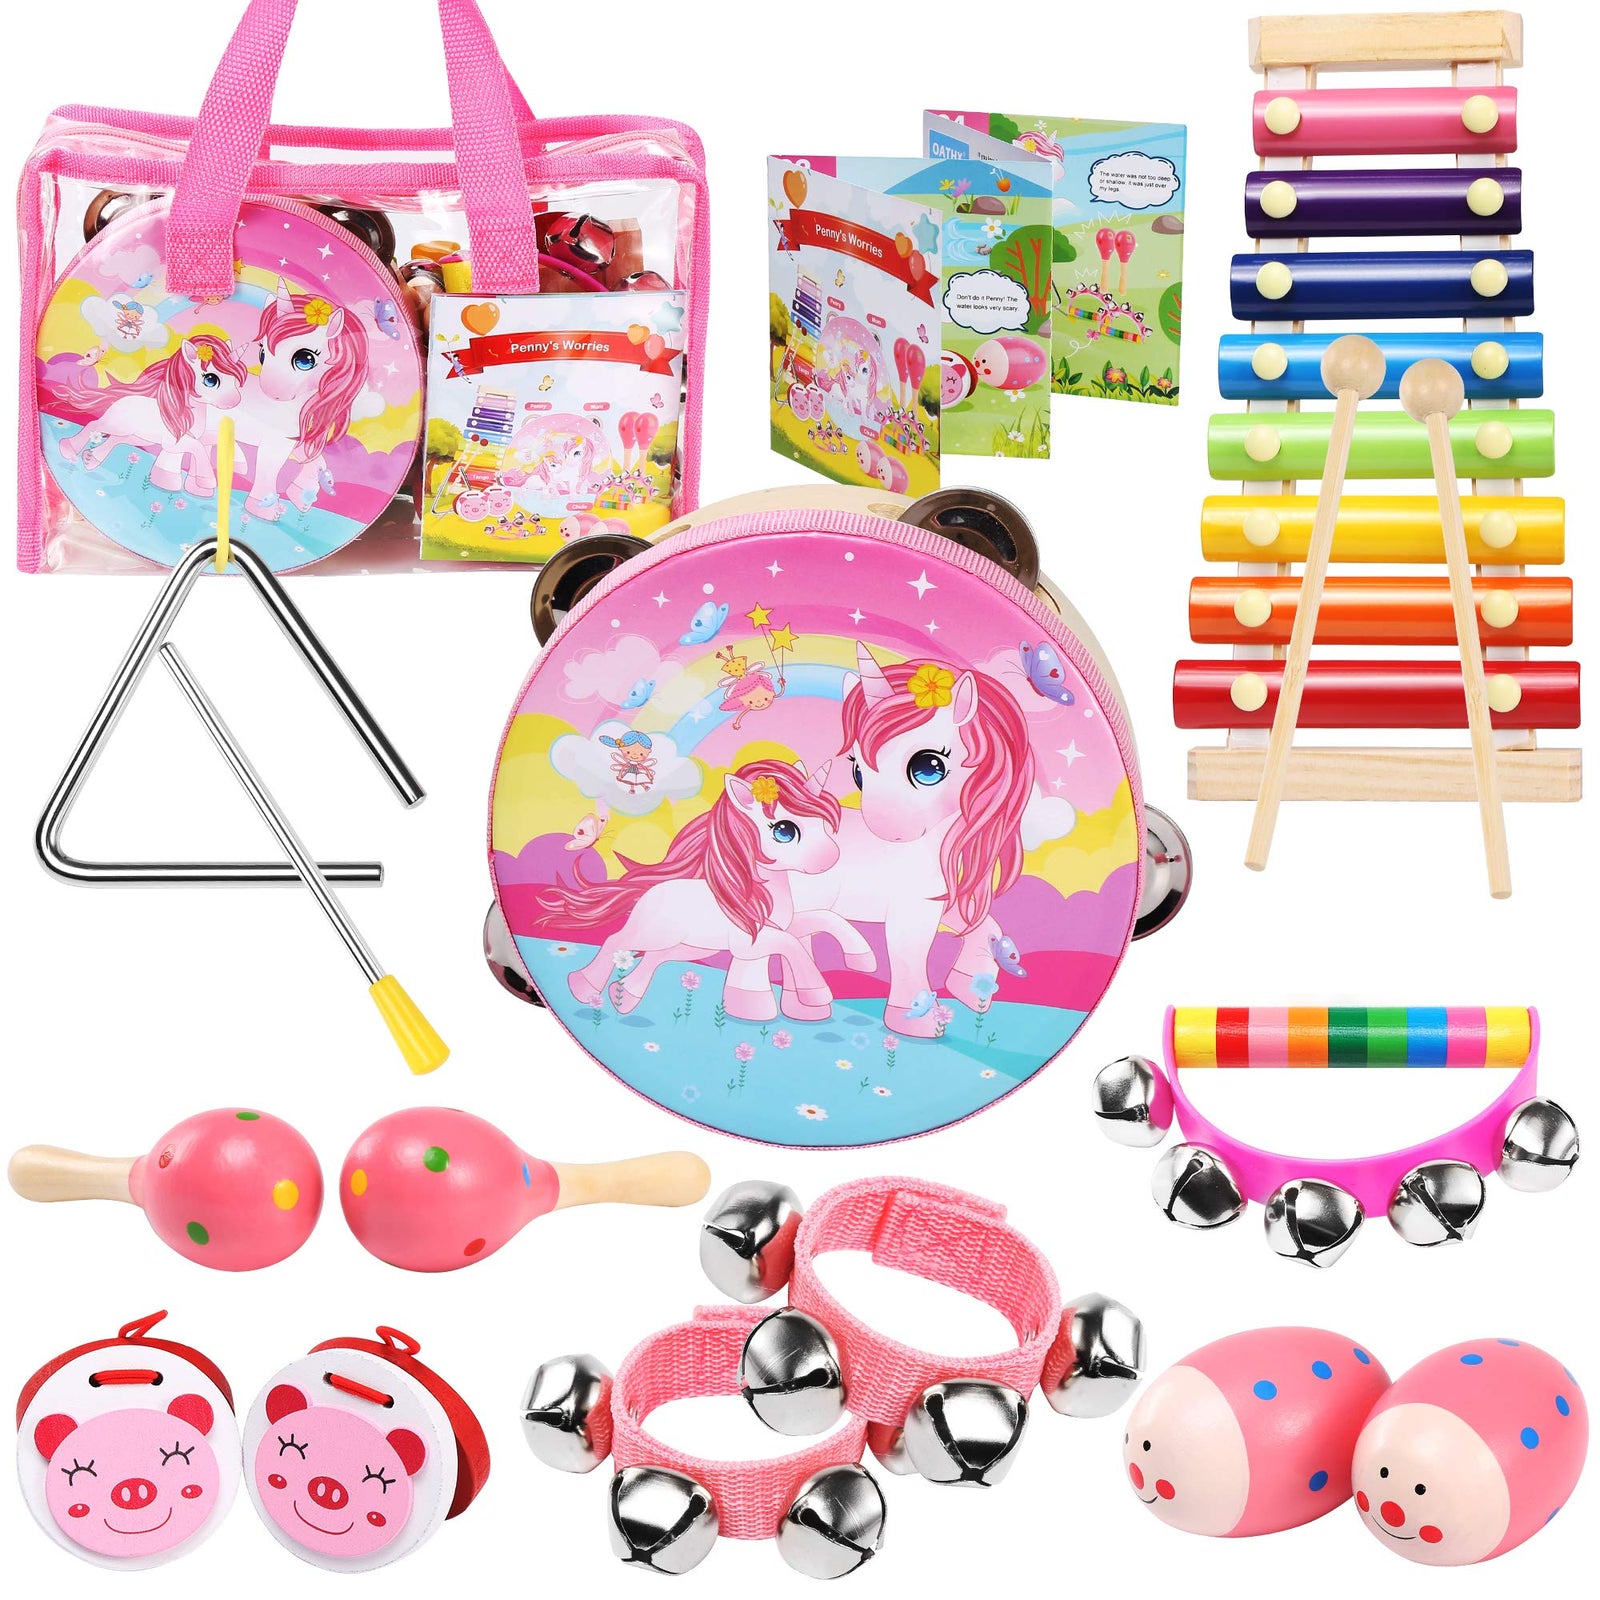 oathx Baby Girl Gifts /Toddler Musical Instruments Ages 1-3 /Baby Music Toys 6-12-9-18 Months Infant /1st Birthday Girl Gifts for 1 2 Year Old/Kids Preschool Educational Learning Toys Drum, Xylophone